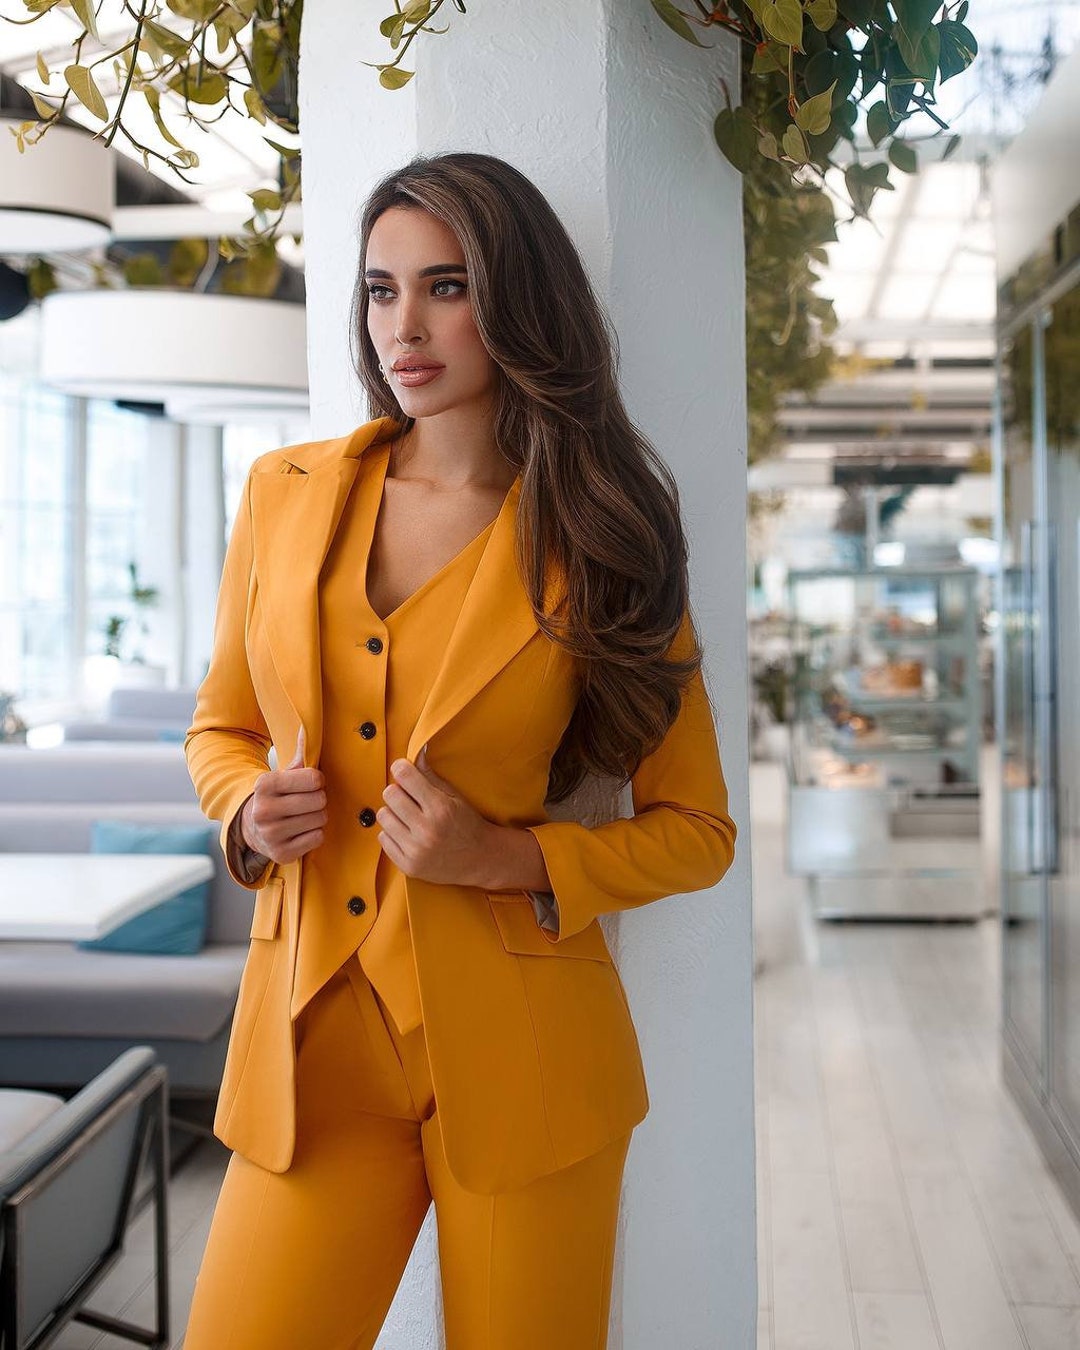 Custom Made Yellow Formal Suit For Women Perfect For Office, Business,  Weddings, Proms, And Evening Events Jacket And Pants Set Back From  Greatvip, $70.48 | DHgate.Com